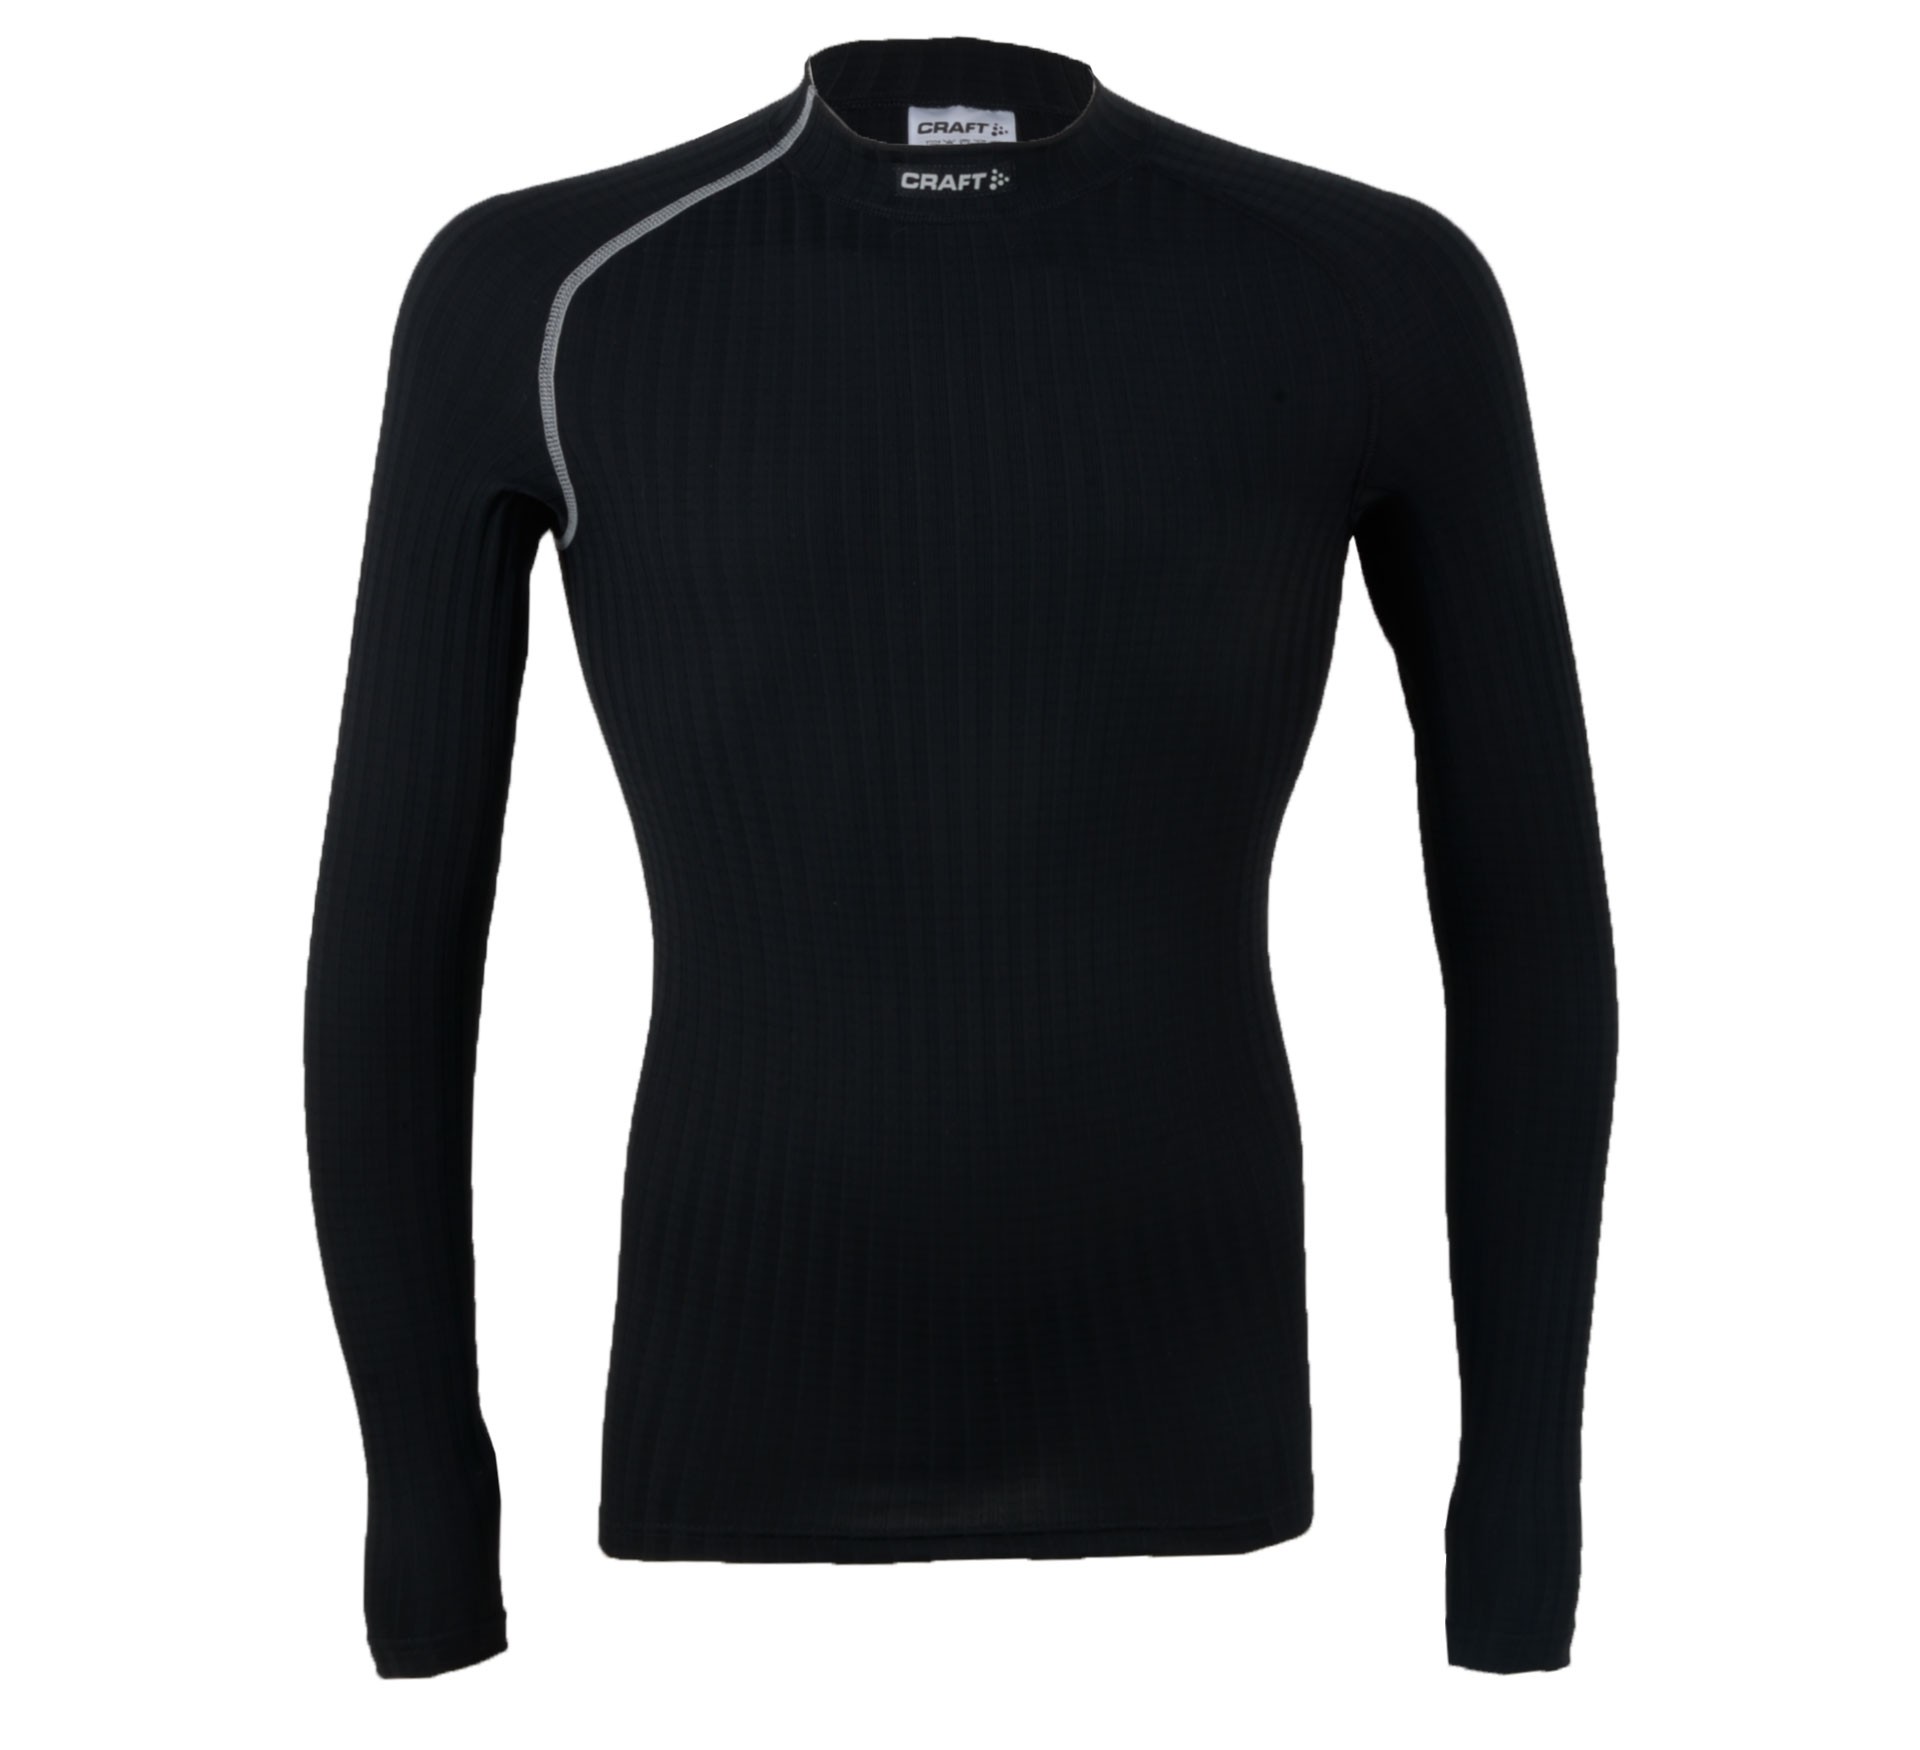 Plutosport - Craft Pro Active Extreme Thermo Shirt Heren